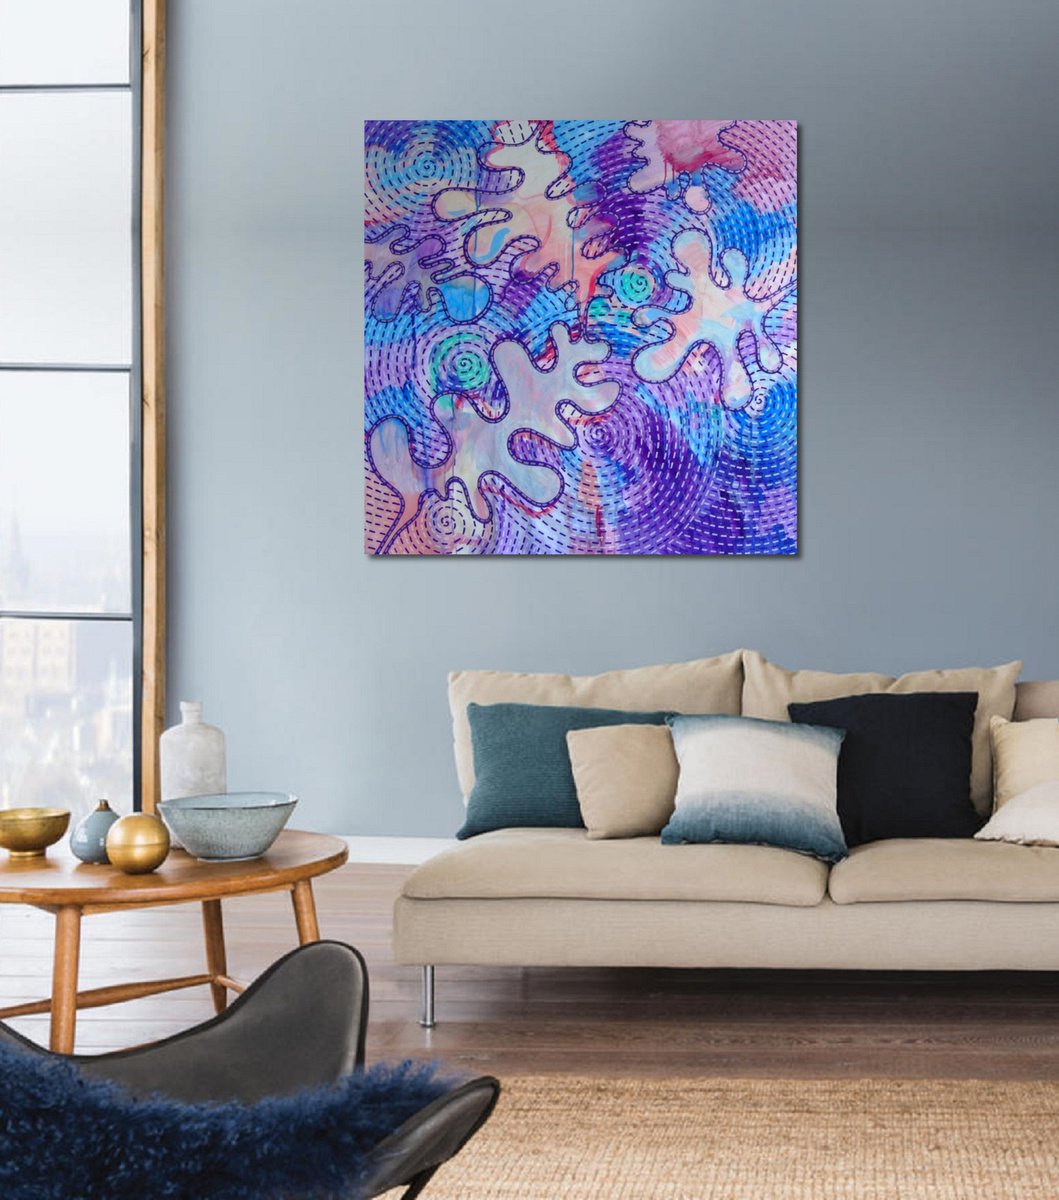 Violet Garden #2  - Extra Large Painting - Shipping Rolled in a Tube by Marina Krylova